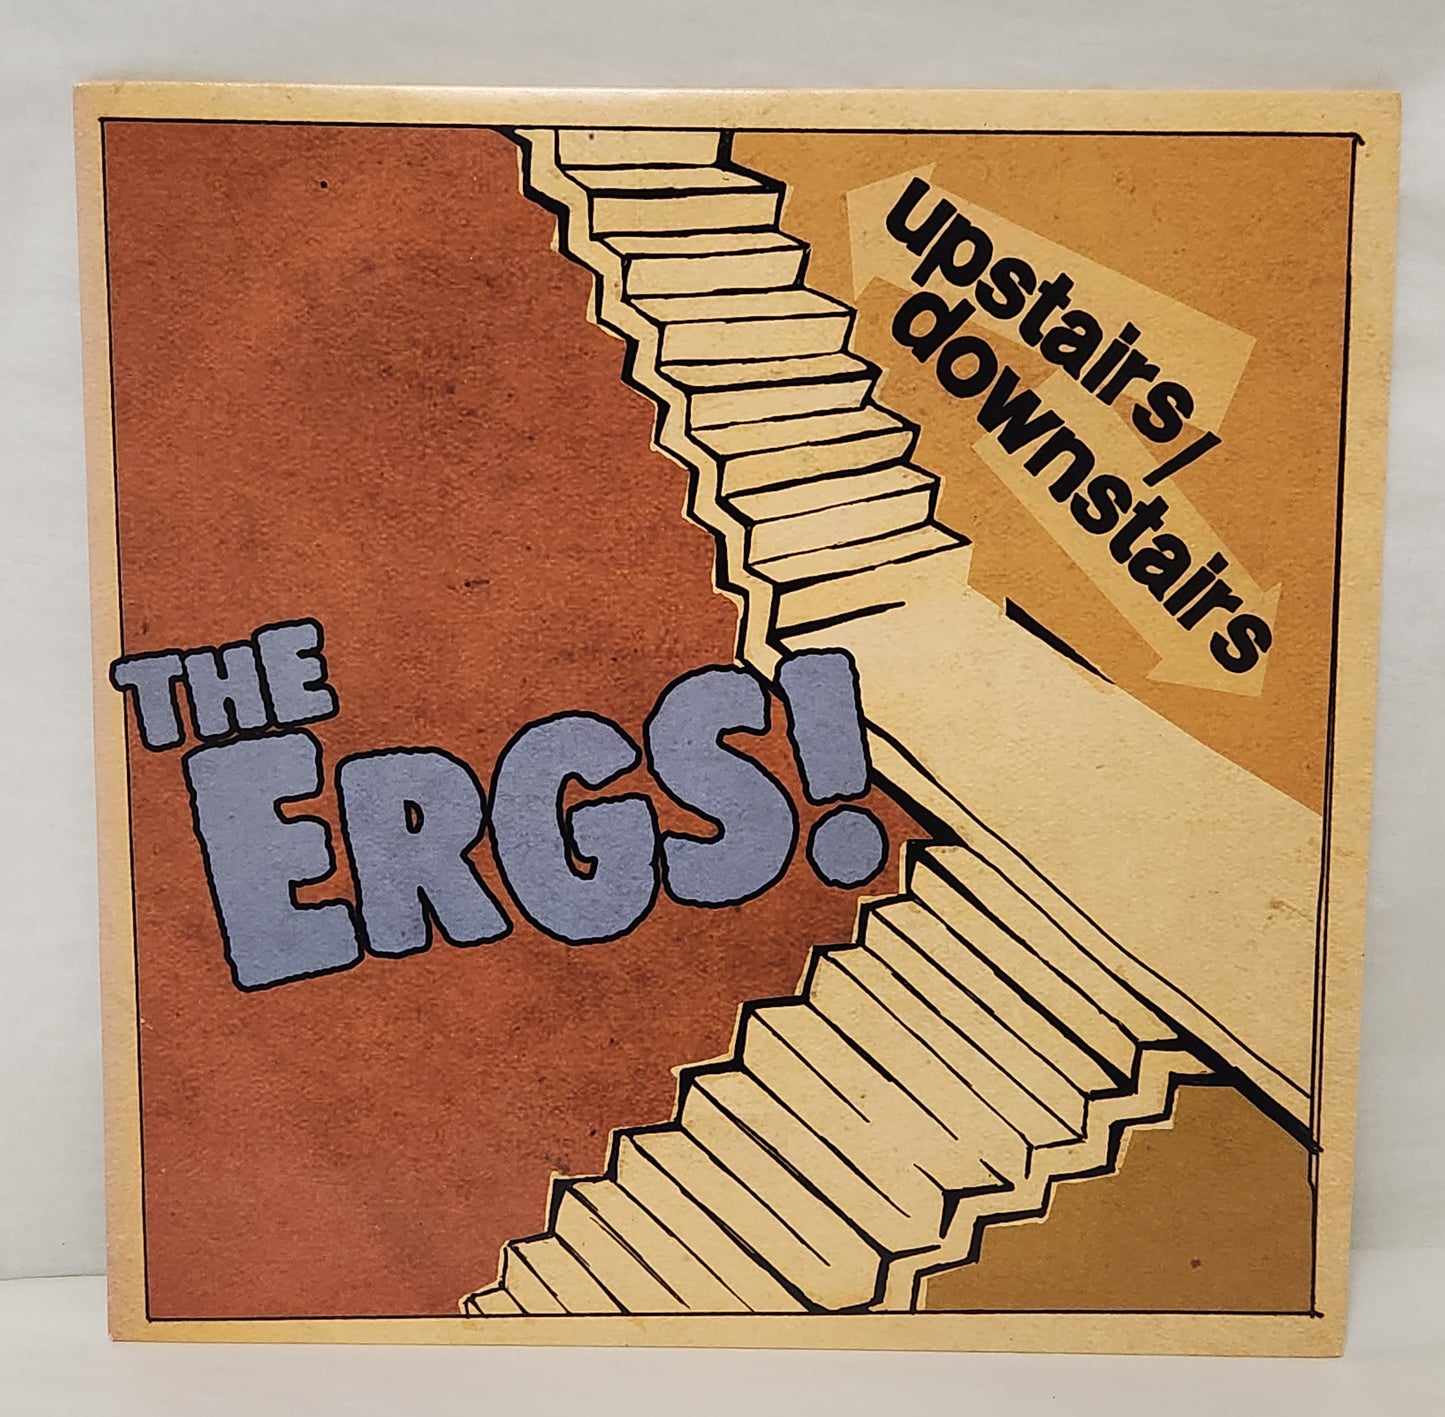 The Ergs! "Upstairs / Downstairs" 2007 Punk Record Album